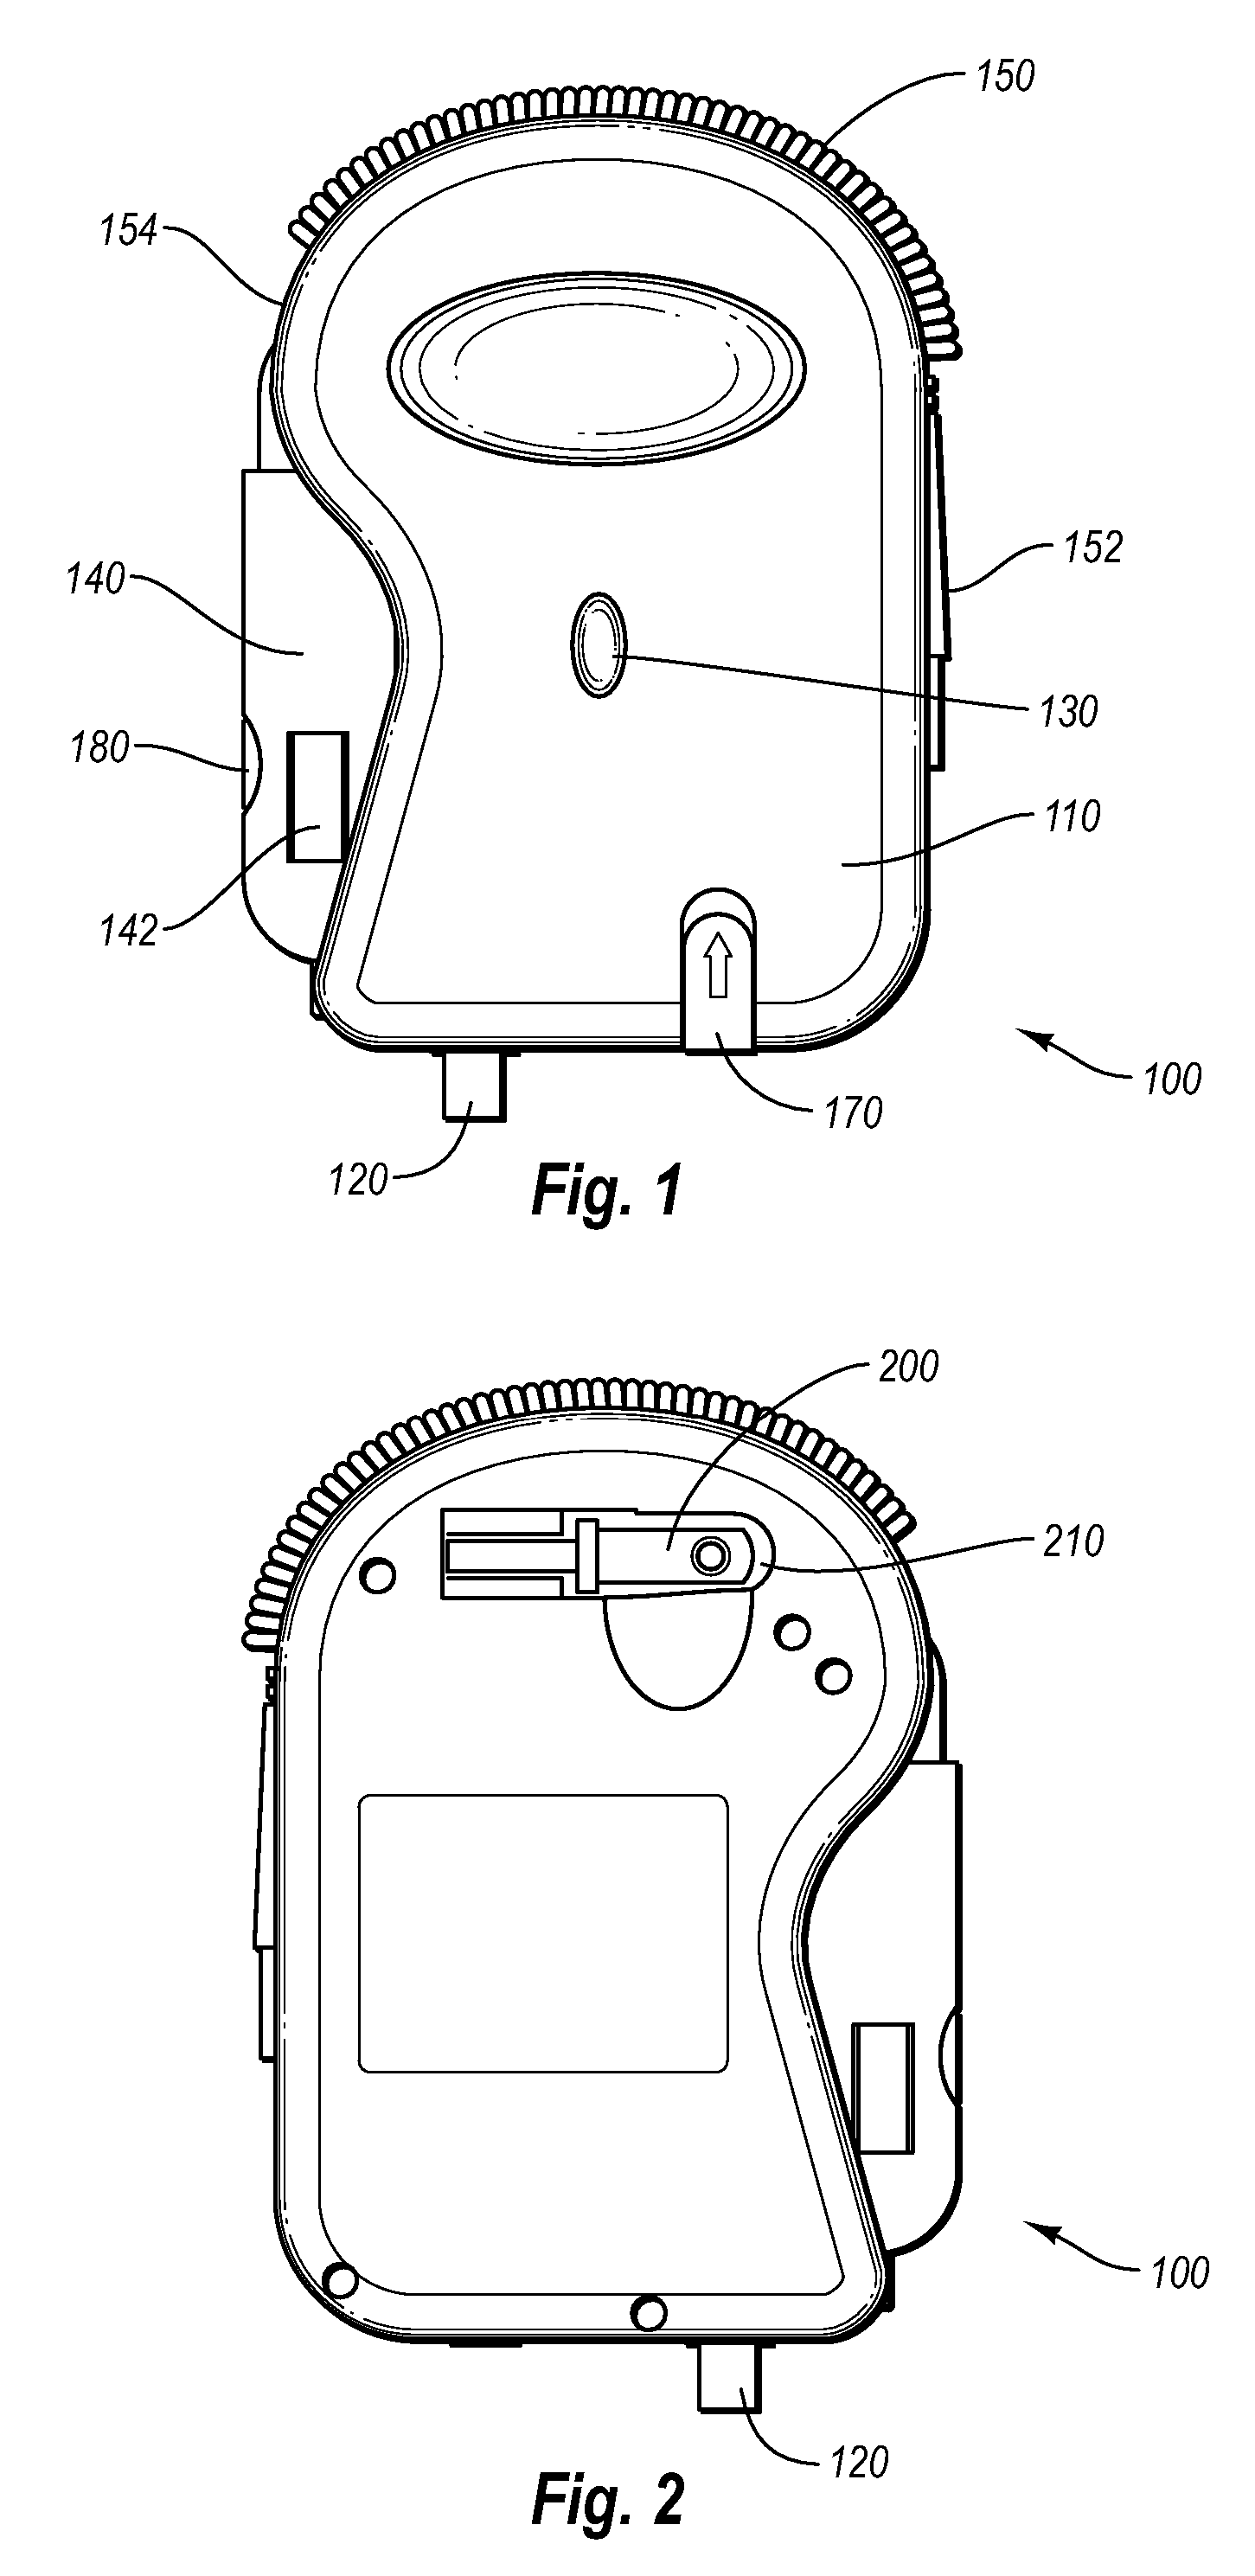 Systems and methods for powering an electronic device from selectable power sources